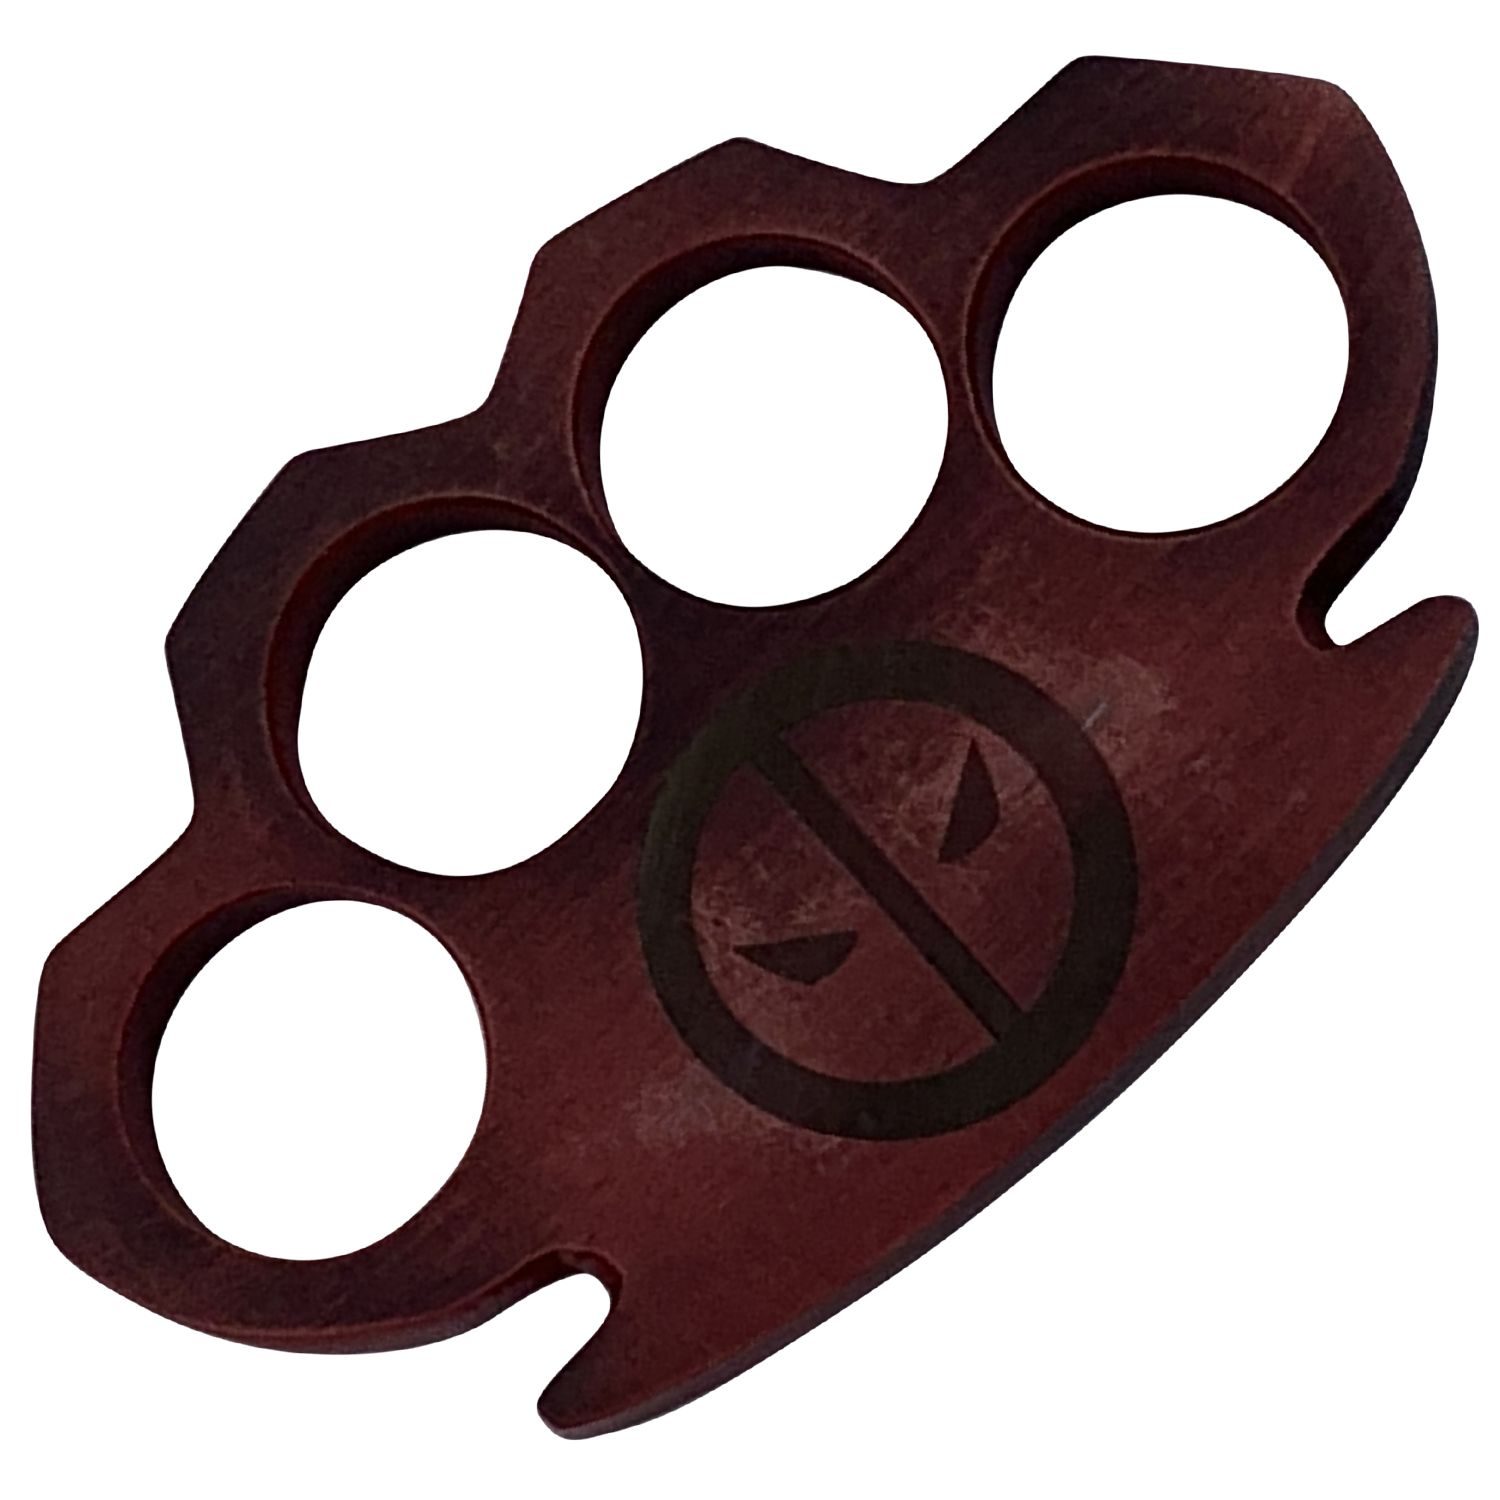 CI 300 P RD DP 1 Cerakote Made in USA Brass Knuckles Red Deadpool